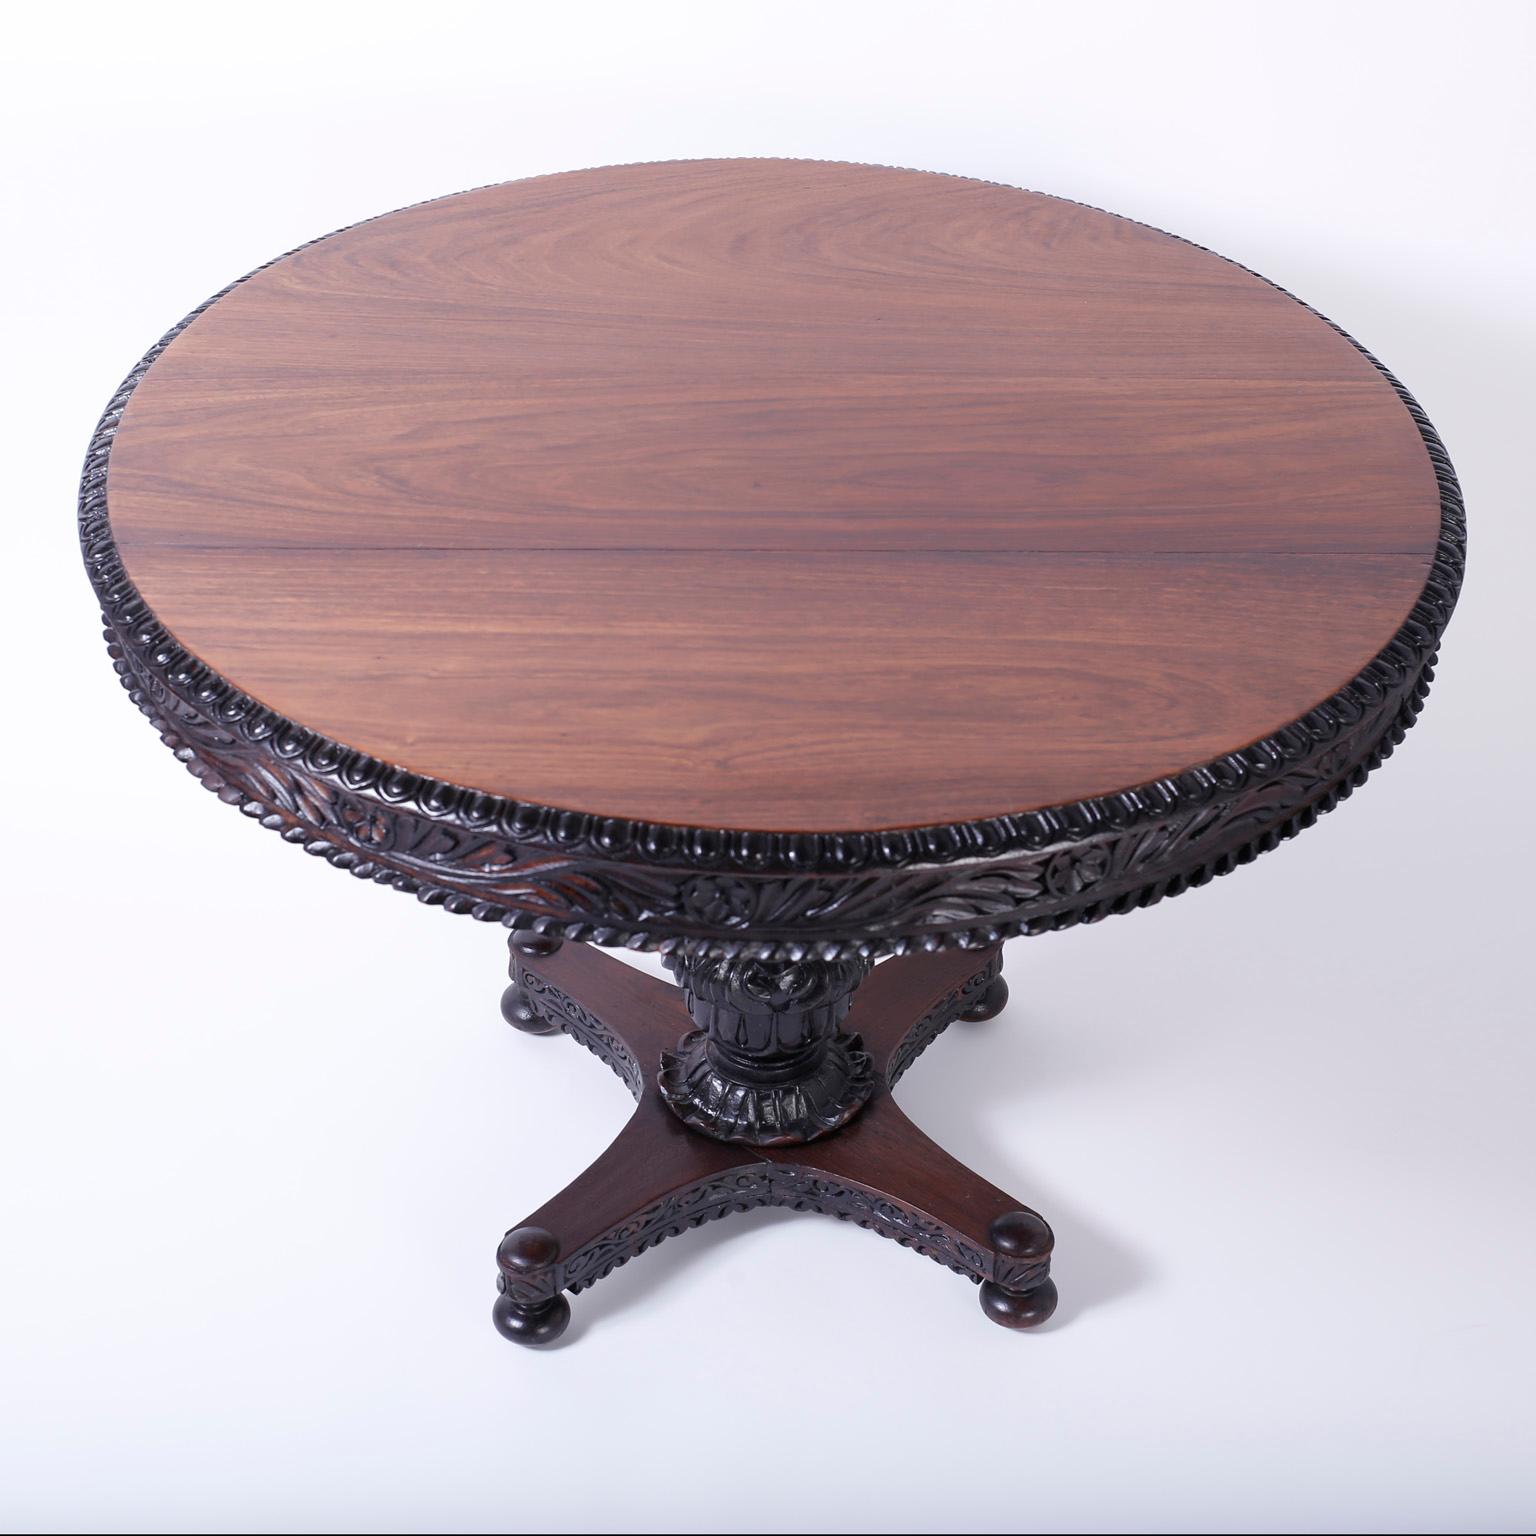 Refined Anglo-Indian round tilt-top dining or centre table crafted in rosewood with a dramatic wood grained top, floral carved skirt, carved acanthus leaf pedestal and a four legged base on bun feet.